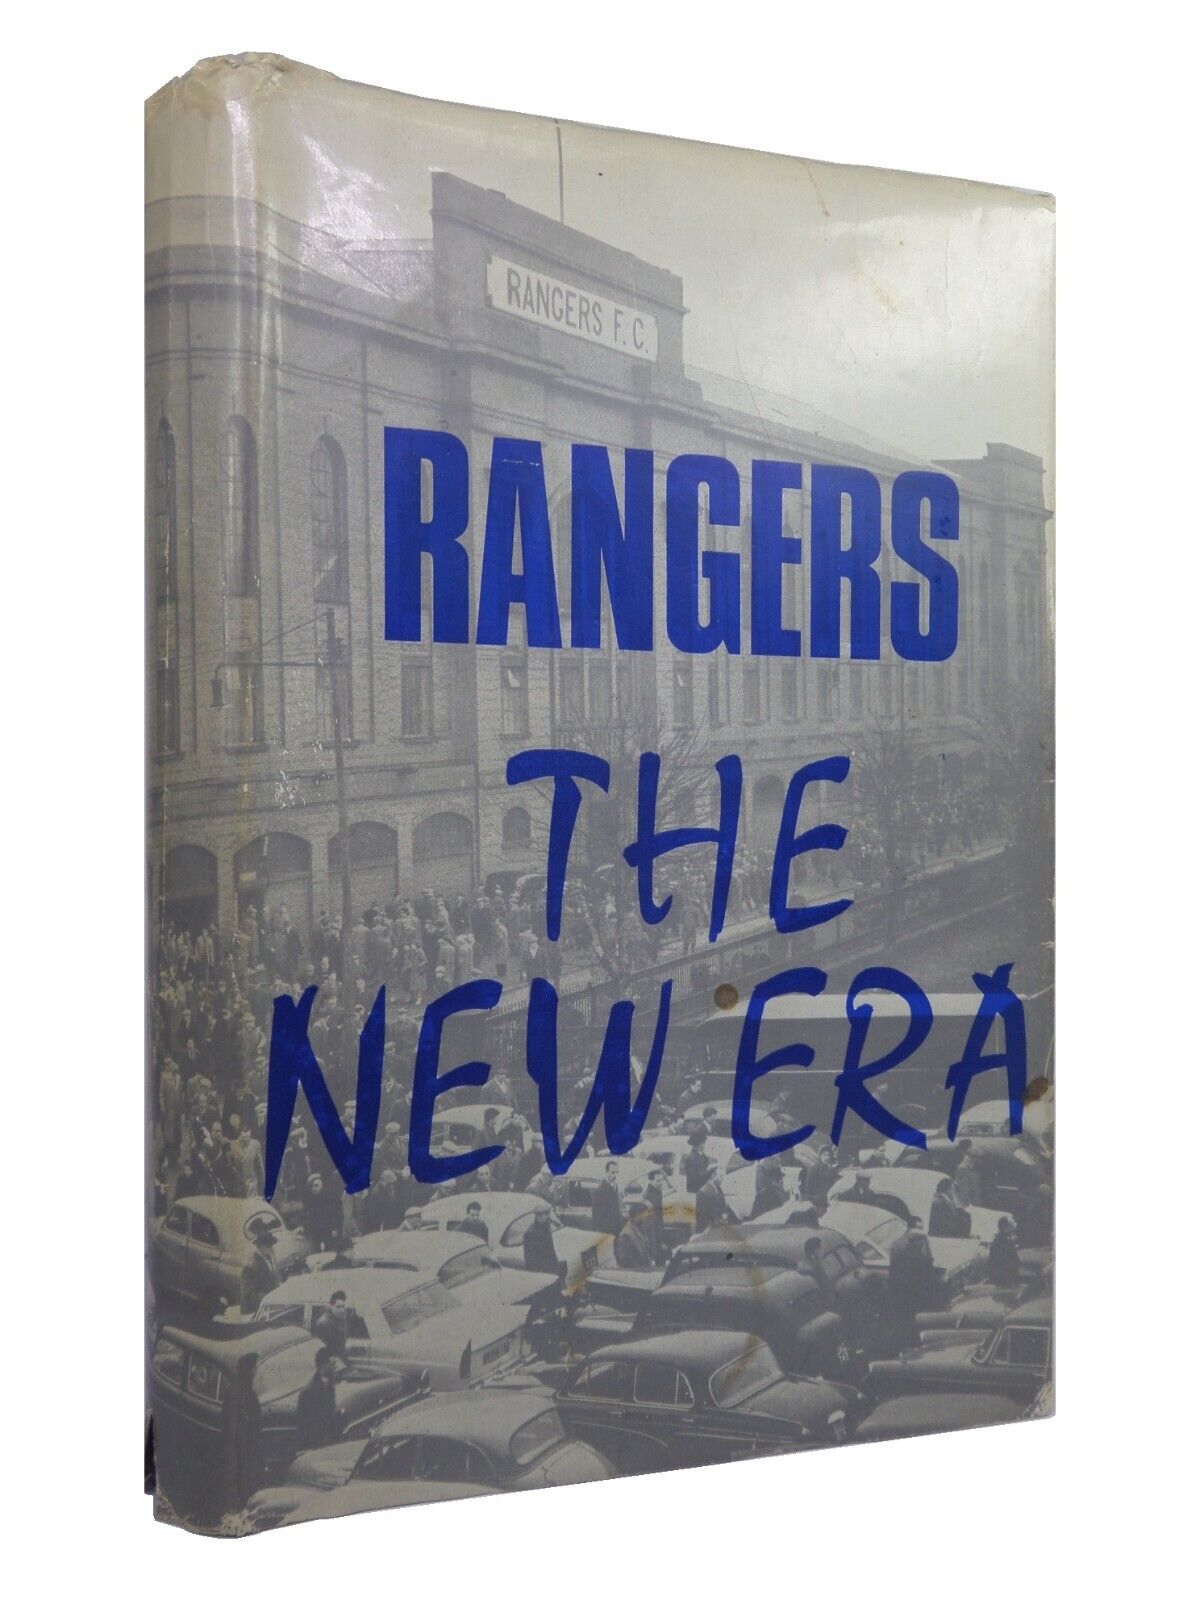 RANGERS: THE NEW ERA 1873-1966 BY WILLIAM ALLISON, FIRST EDITION HARDCOVER